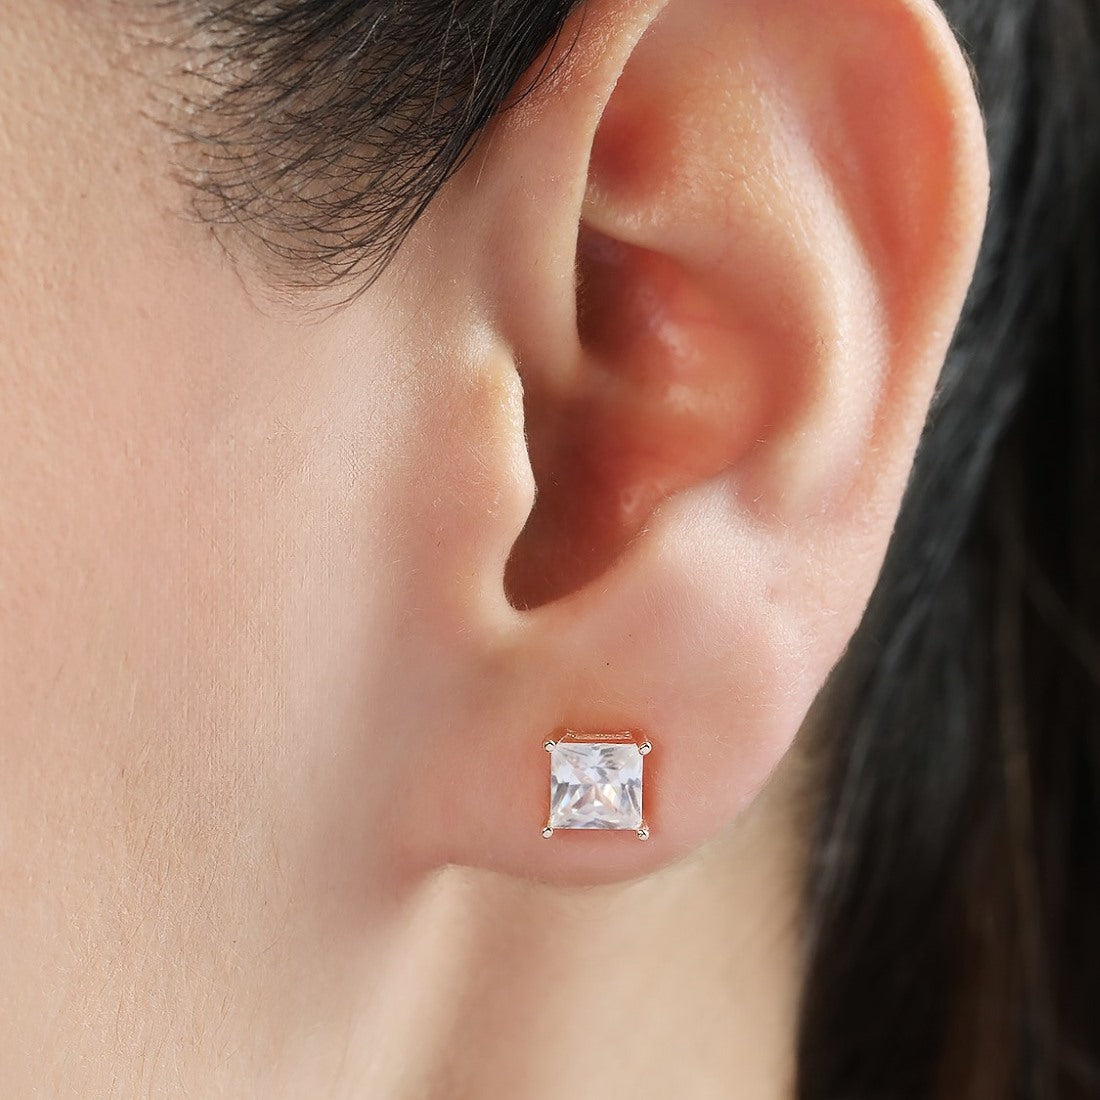 Golden Symmetry Rose Gold-Plated 925 Sterling Silver Square Earrings